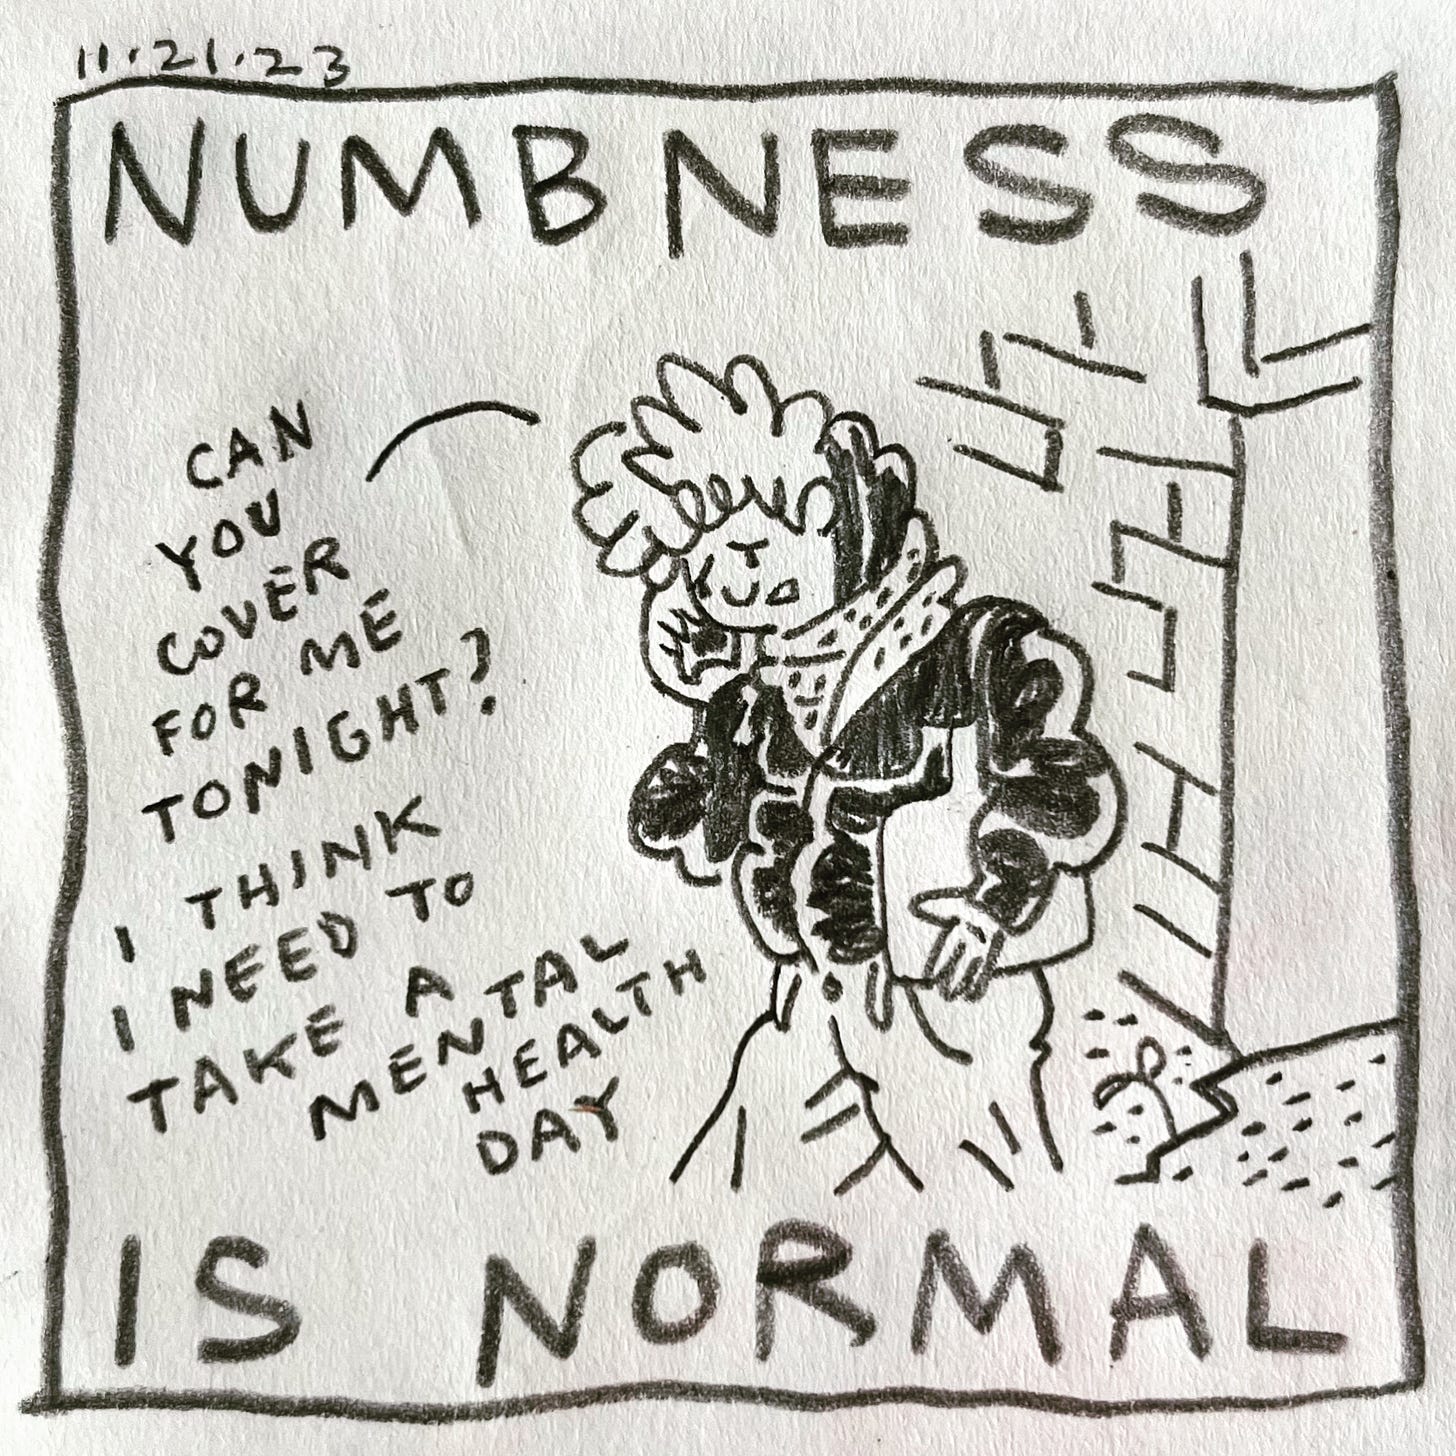 Panel 1: numbness is normal Image: Lark, looking distressed, is walking down the street past a brick building wearing a puffy black coat and light colored pants. A tote bag is slung over their shoulder. They are speaking into the phone, saying, ”can you cover for me tonight? I think I need to take a mental health day”